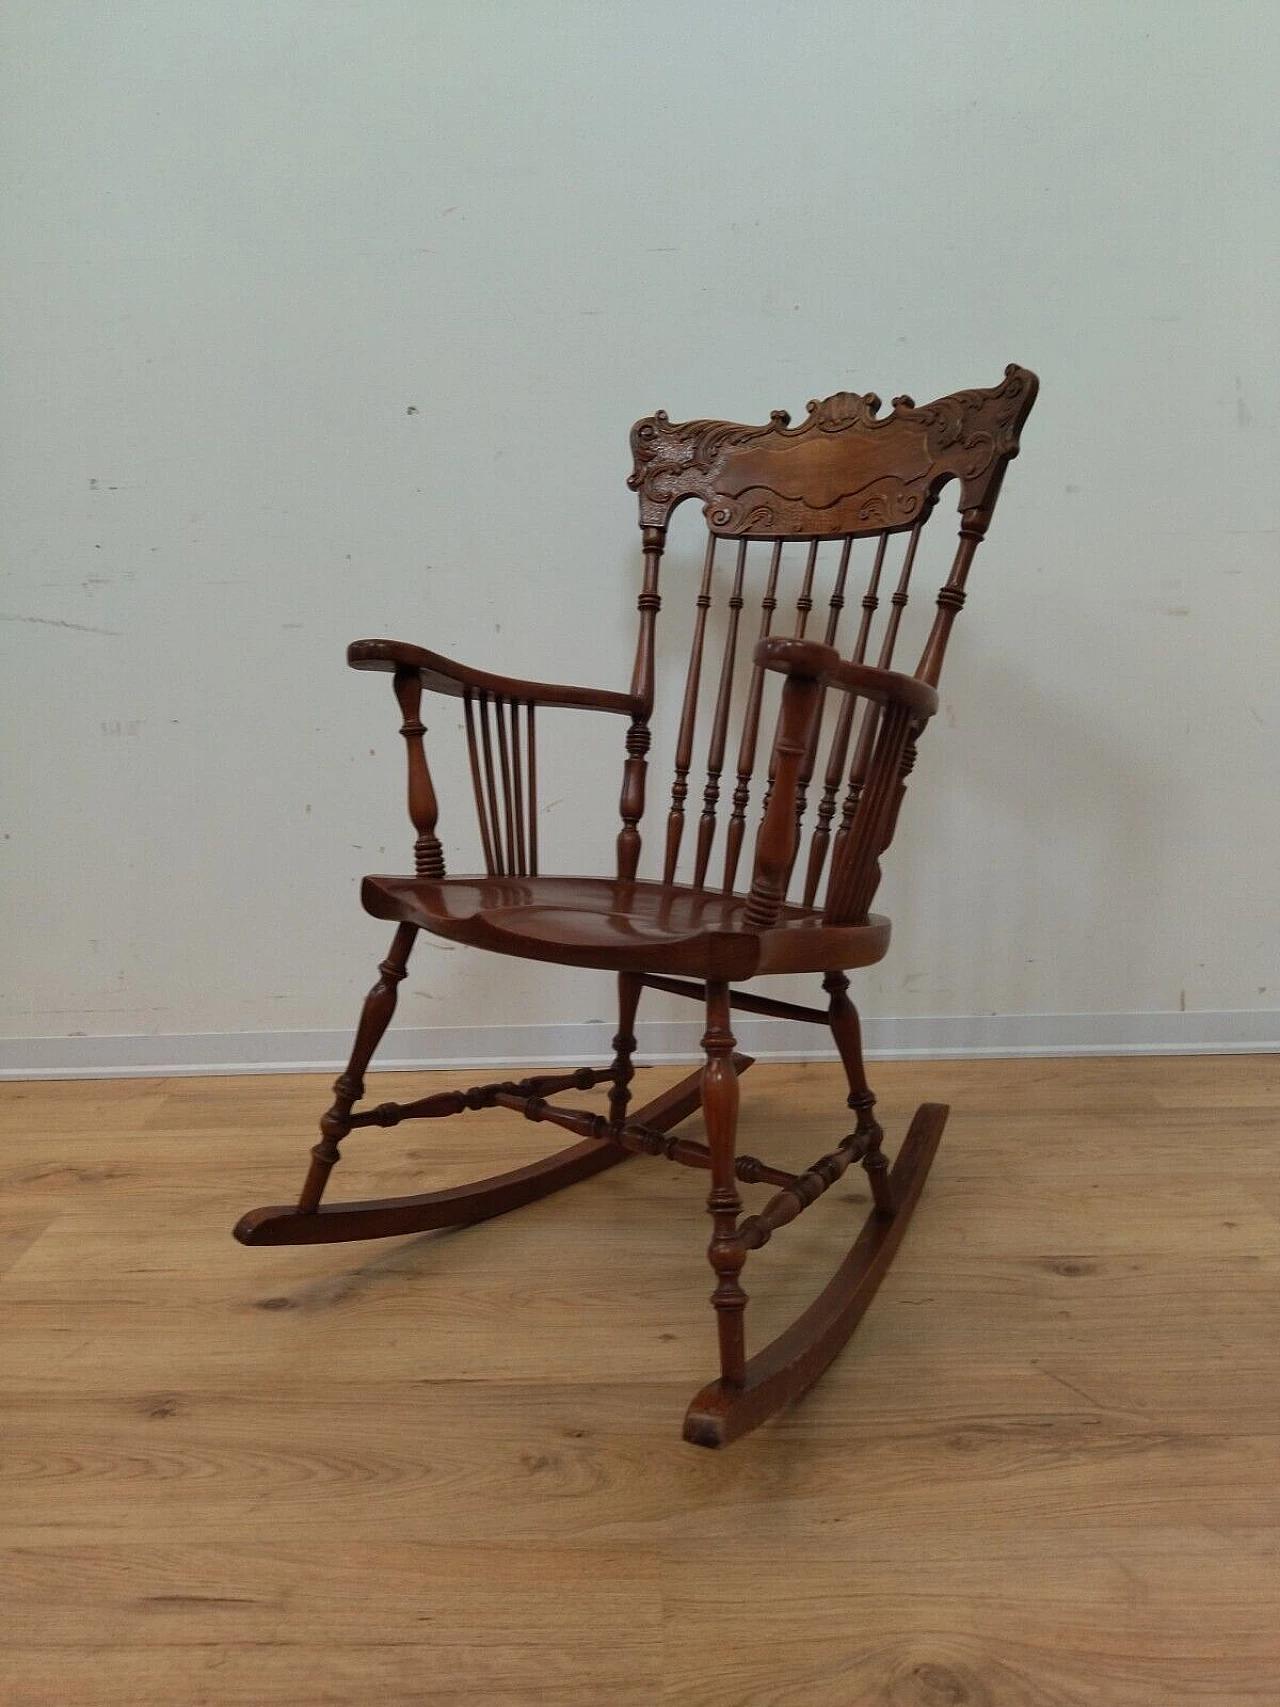 Walnut-stained beech rocking chair 15